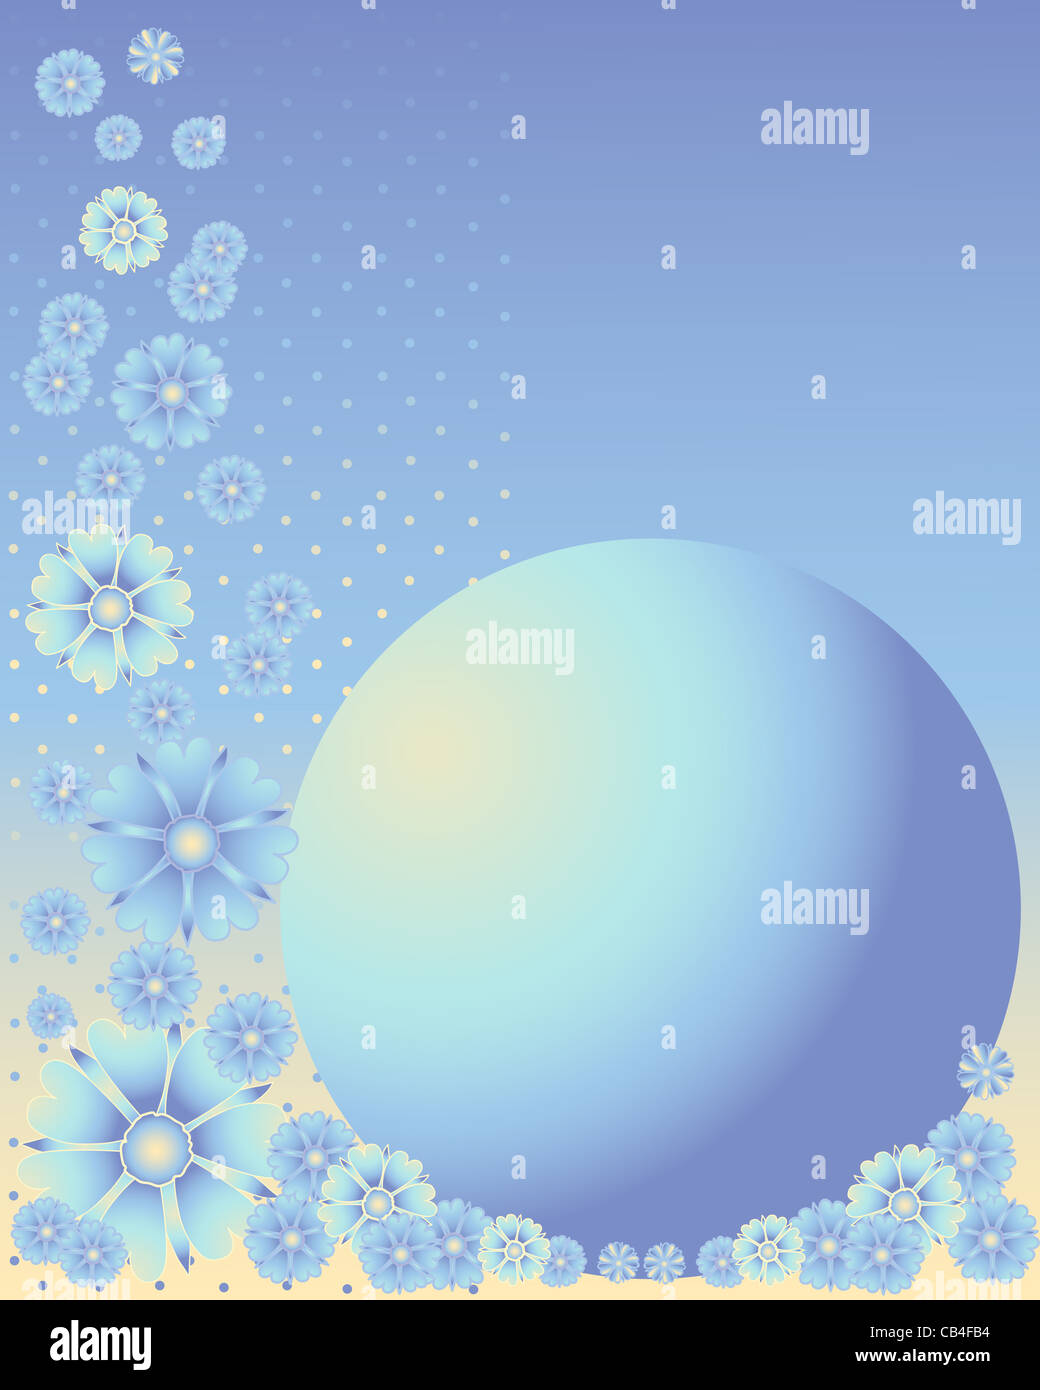 an illustration of a blue globe with bright flowers and dots on a blue yellow background Stock Photo